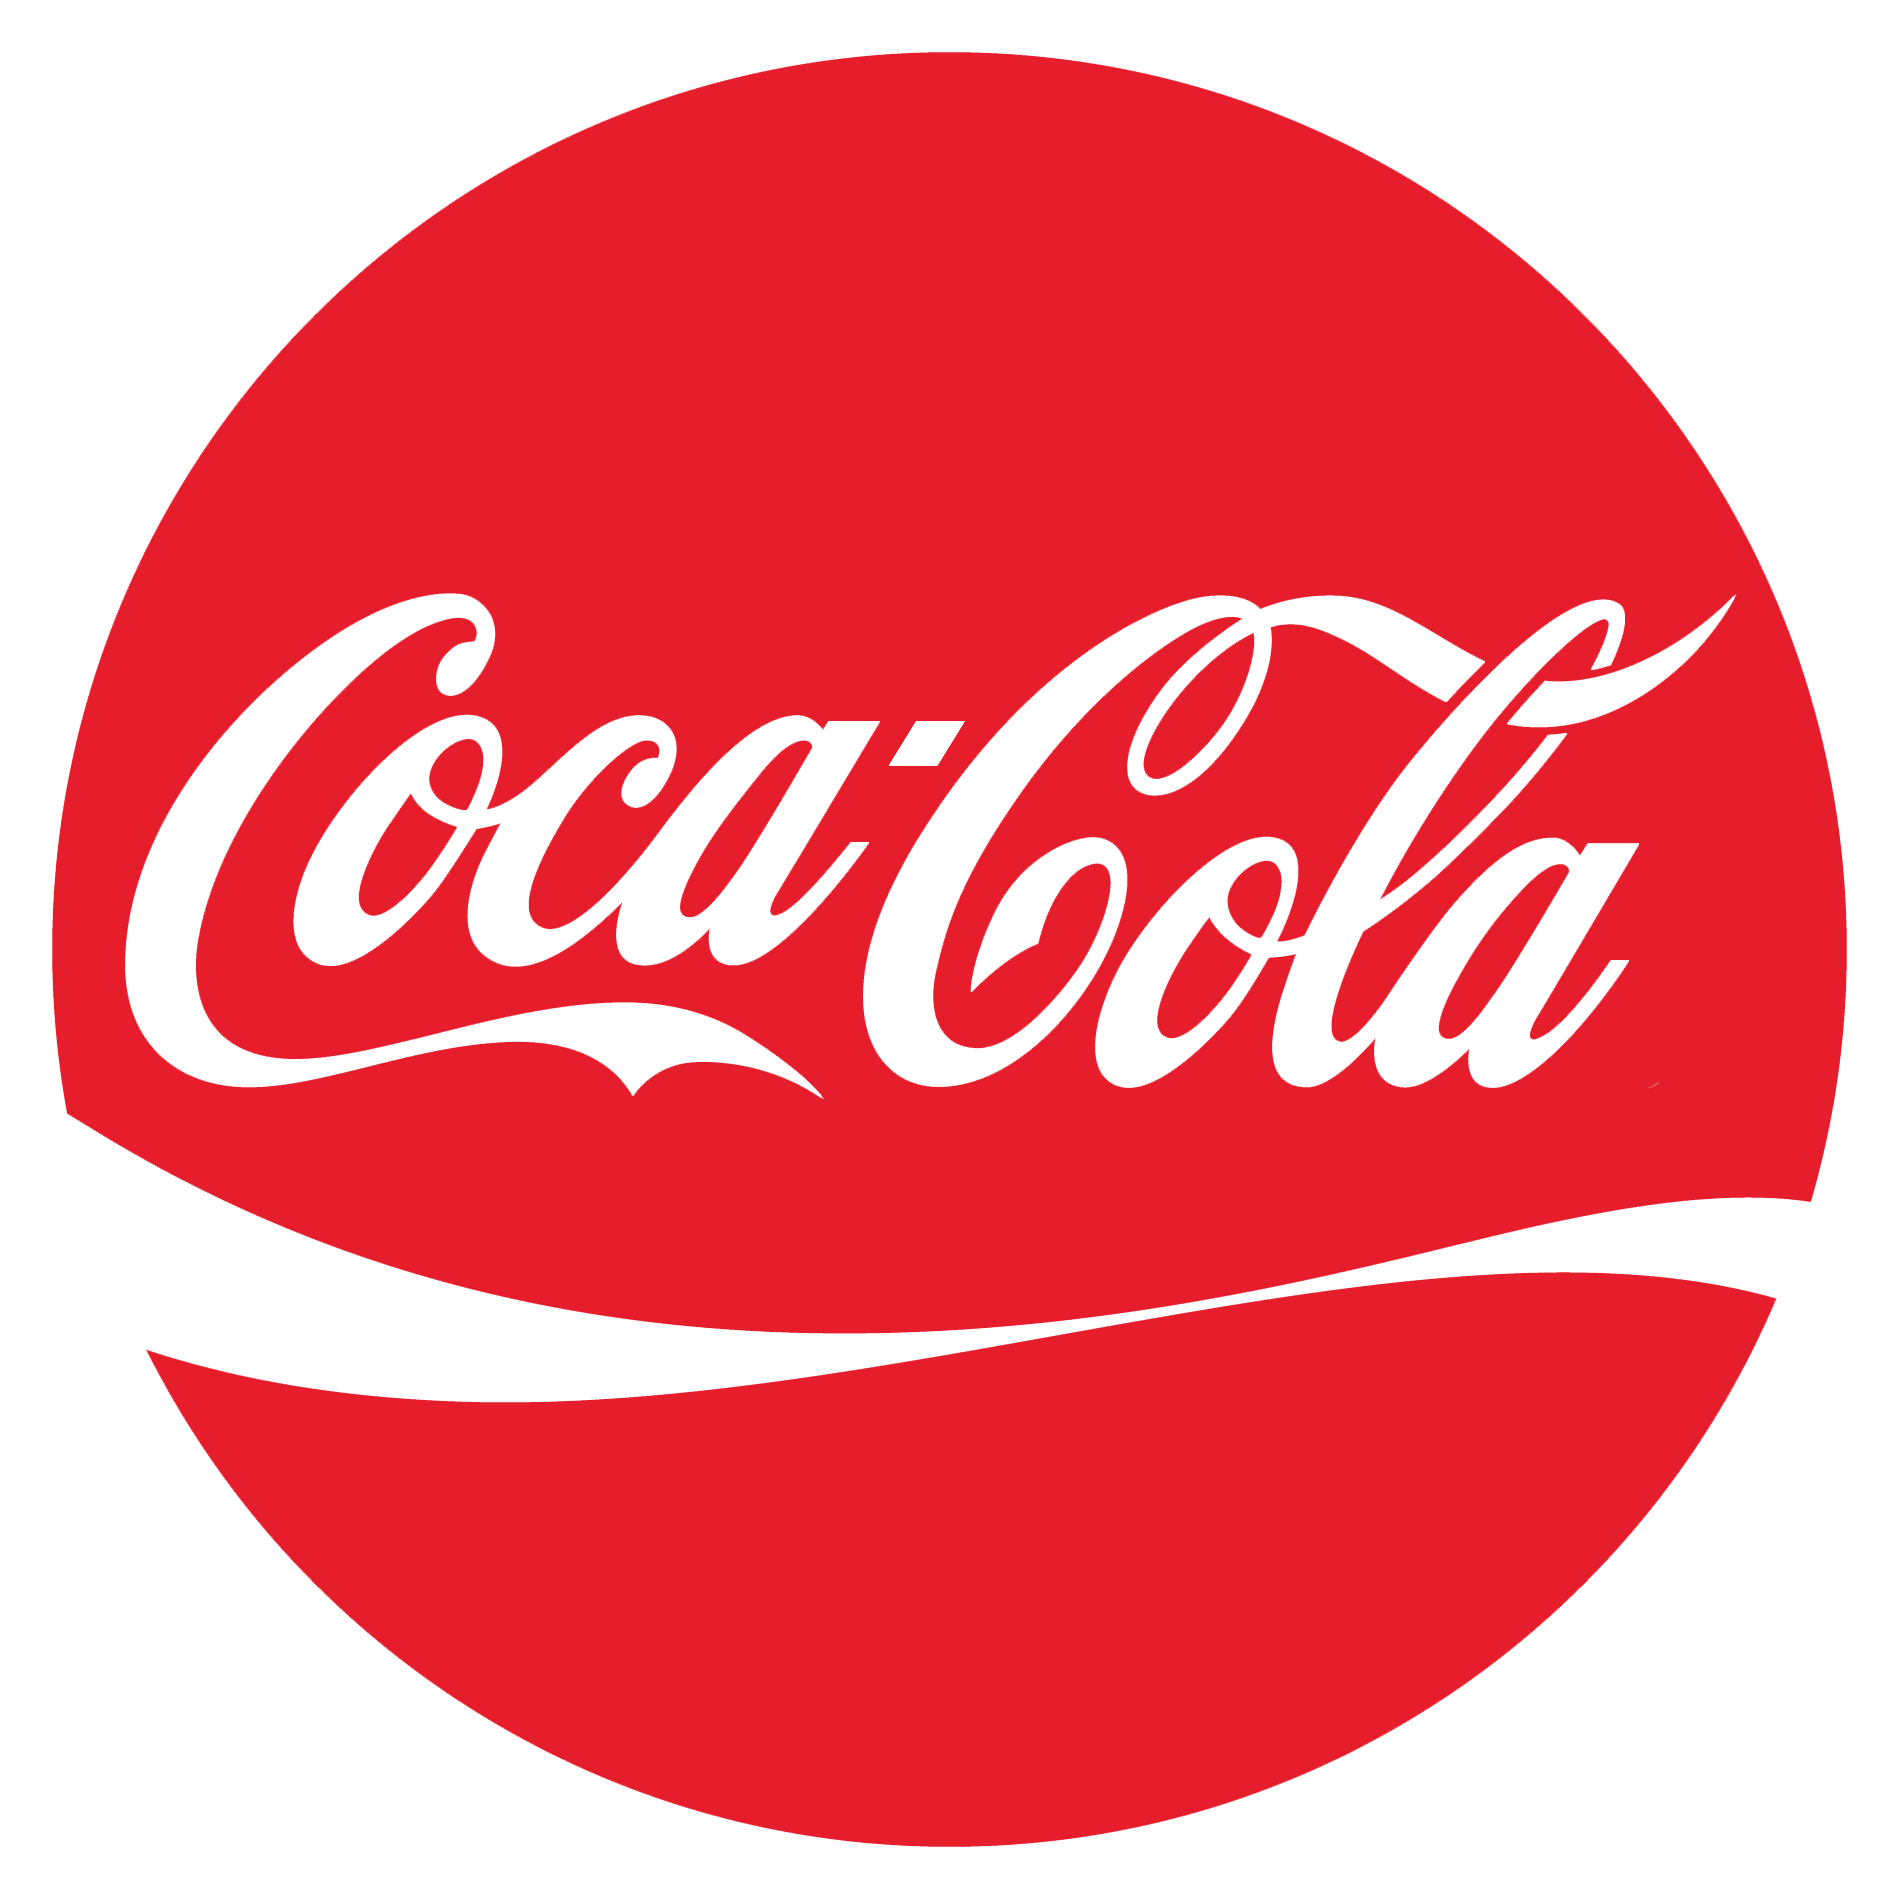 Coca-Cola Logo - Coca-Cola Logo, Coca-Cola Symbol Meaning, History and Evolution